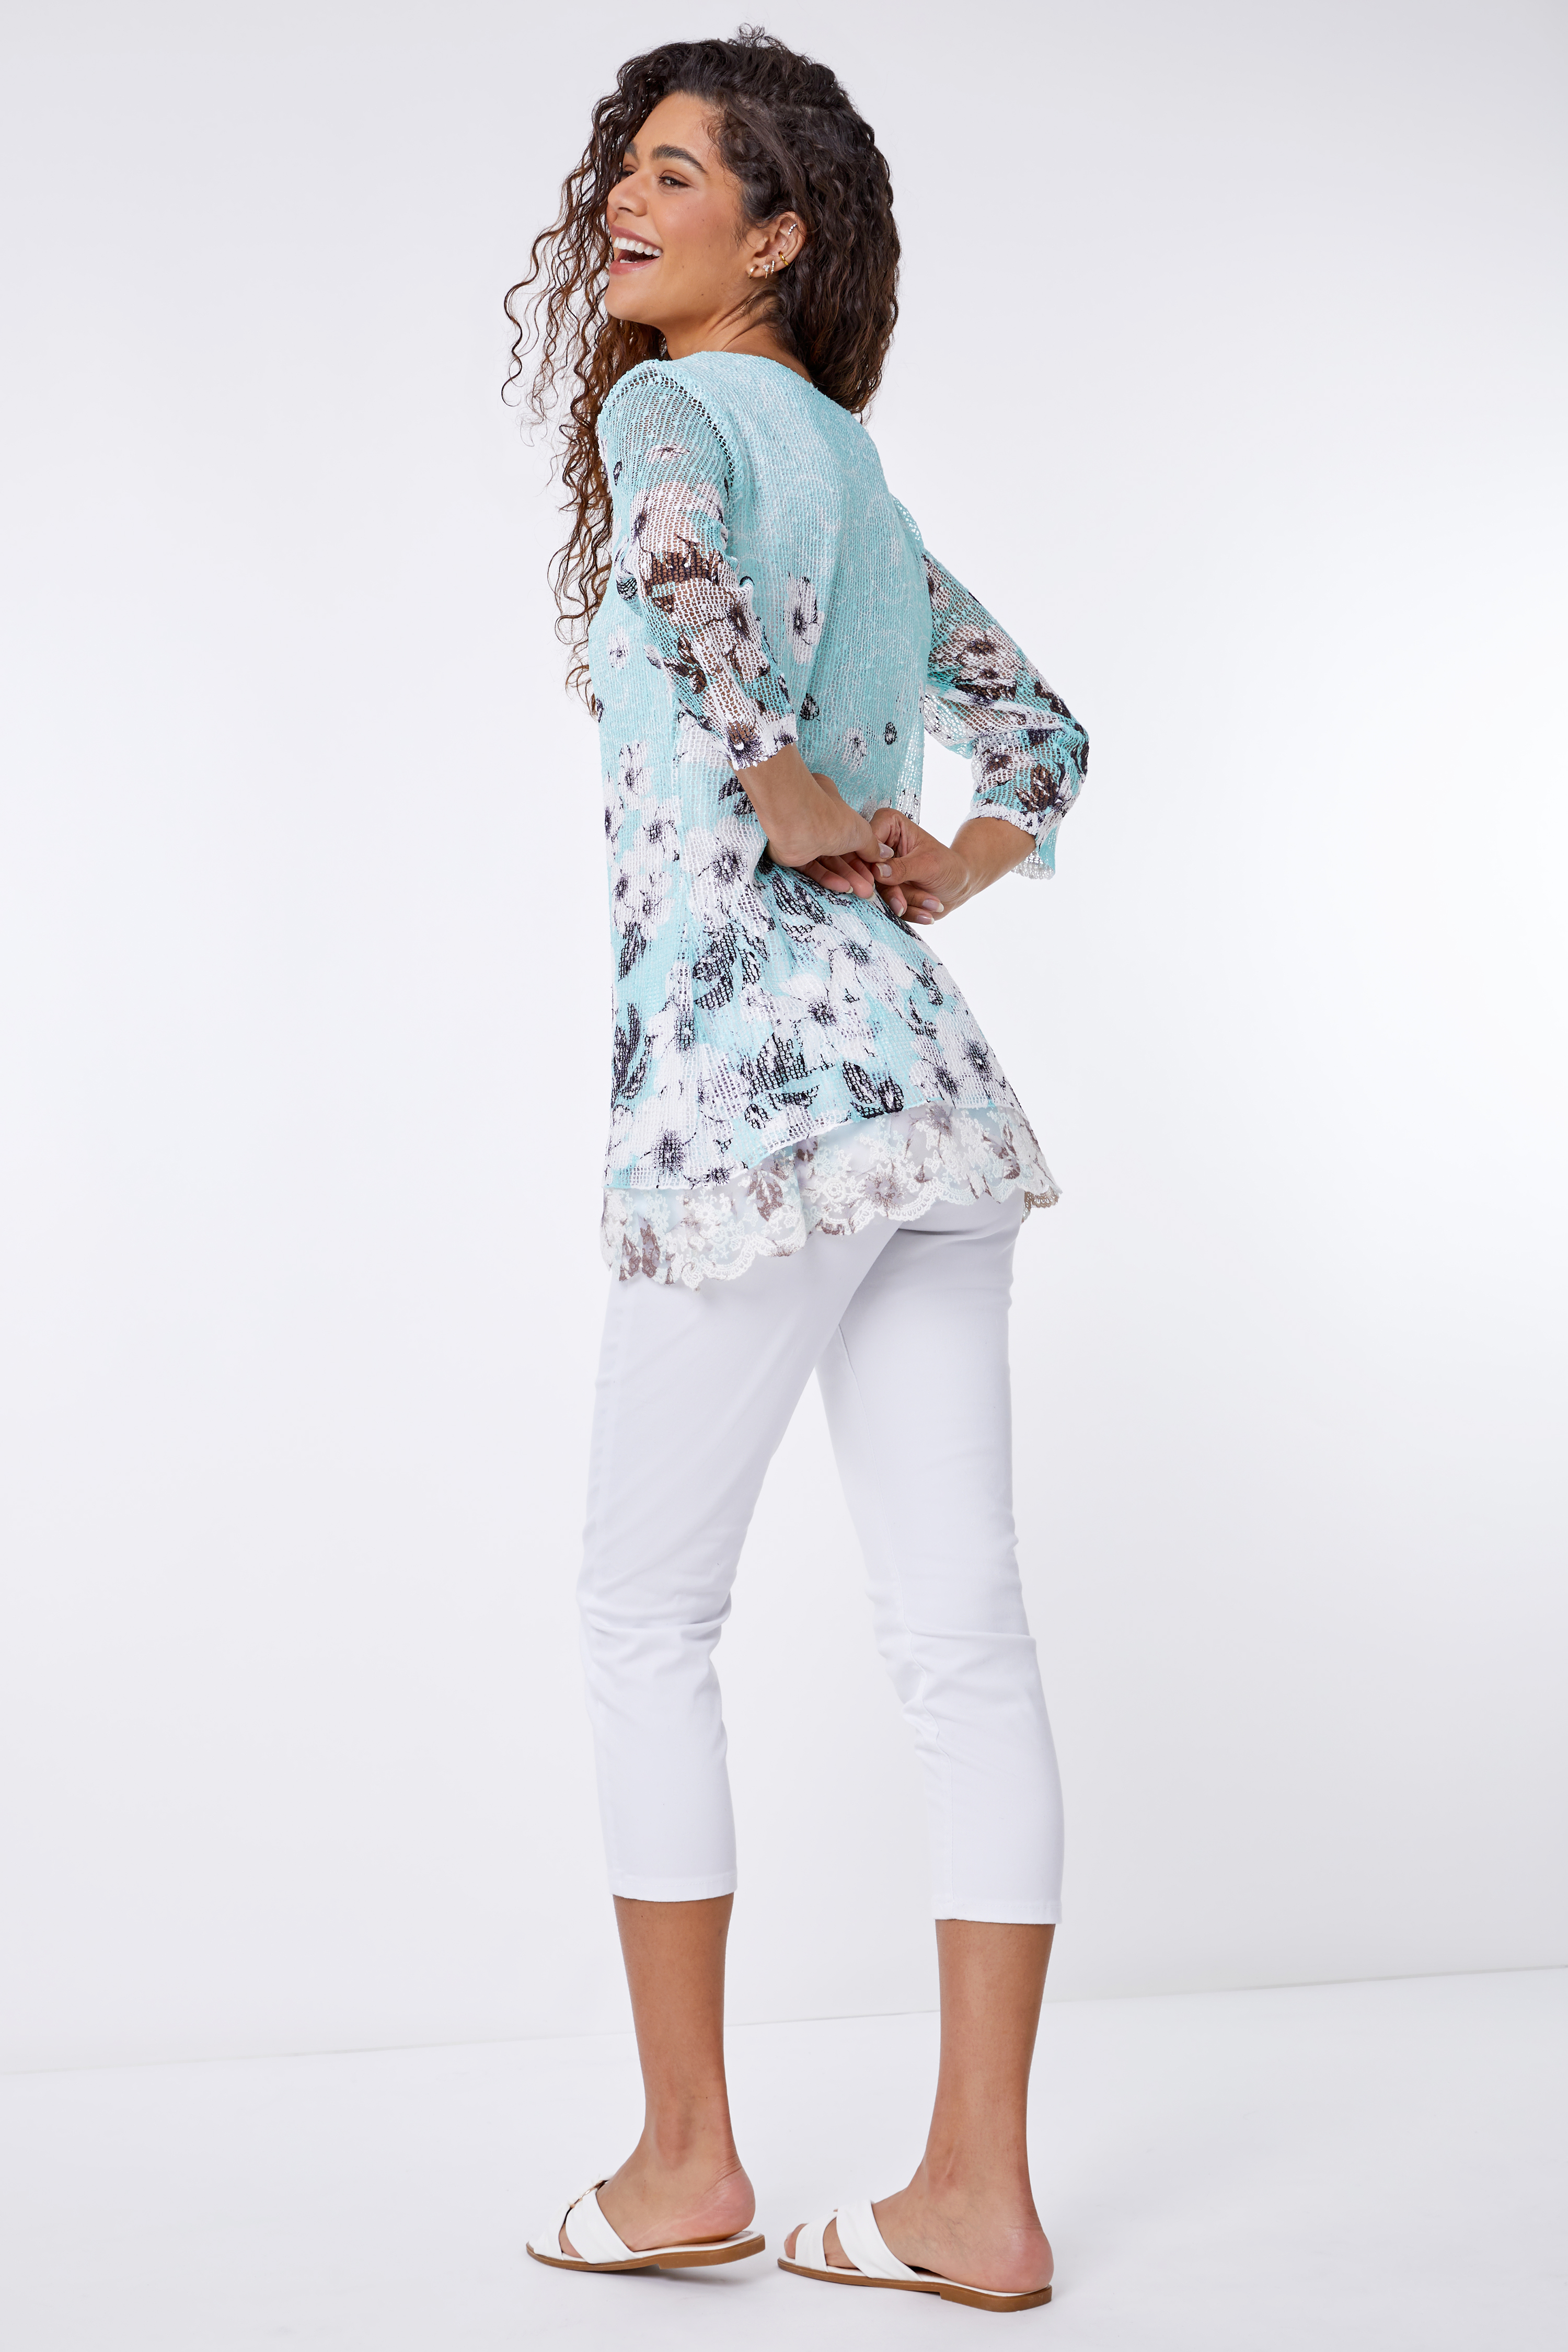 Mint Lace Trim Overlay Floral Print Top, Image 3 of 5